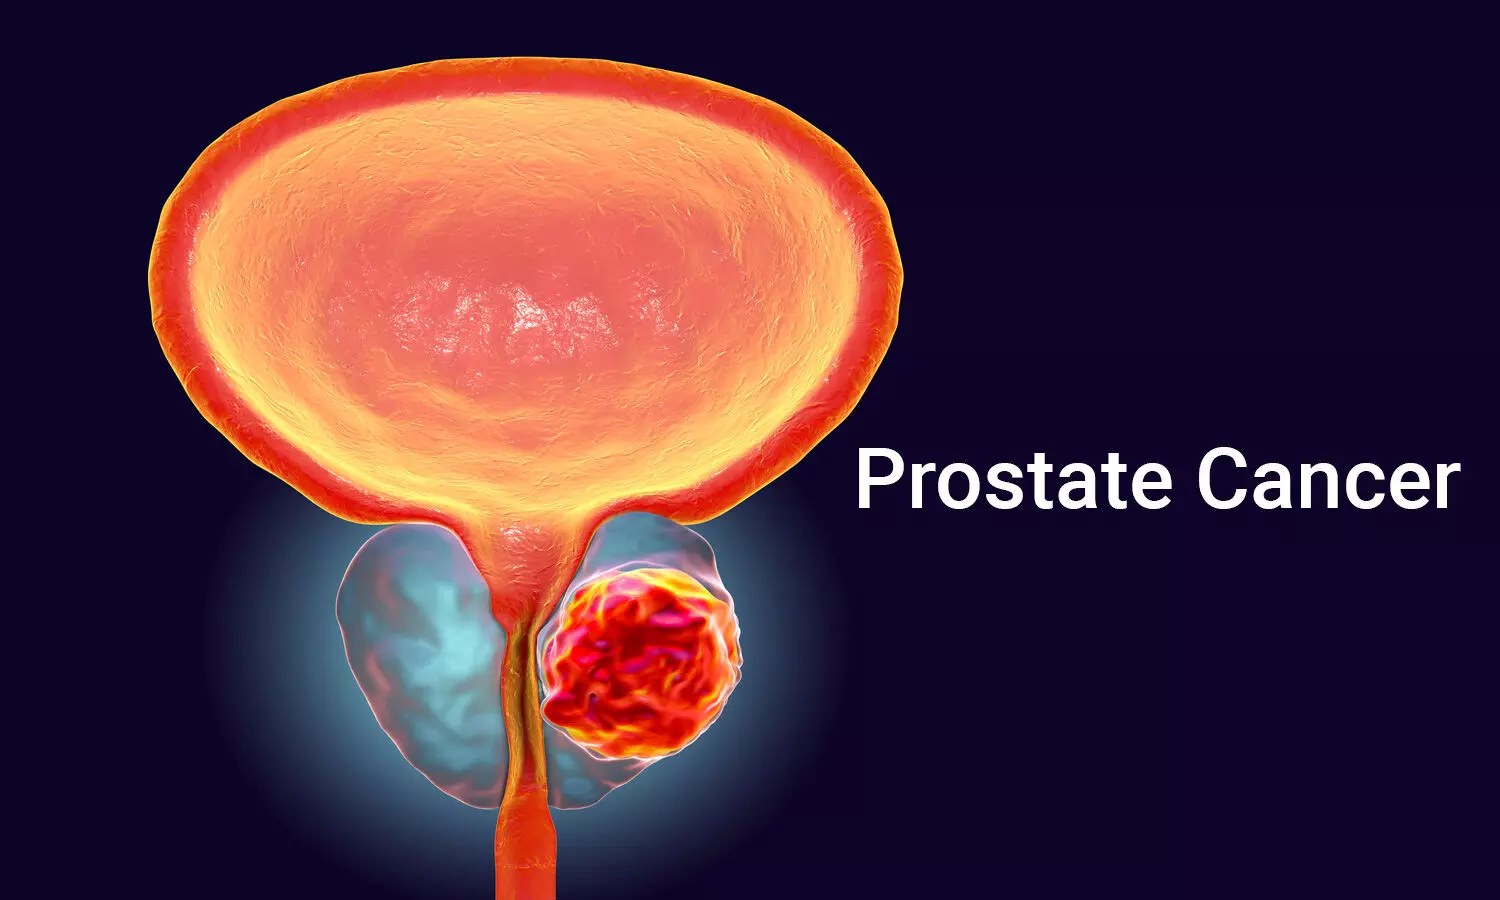 Being overweight in middle age increases prostate cancer risk